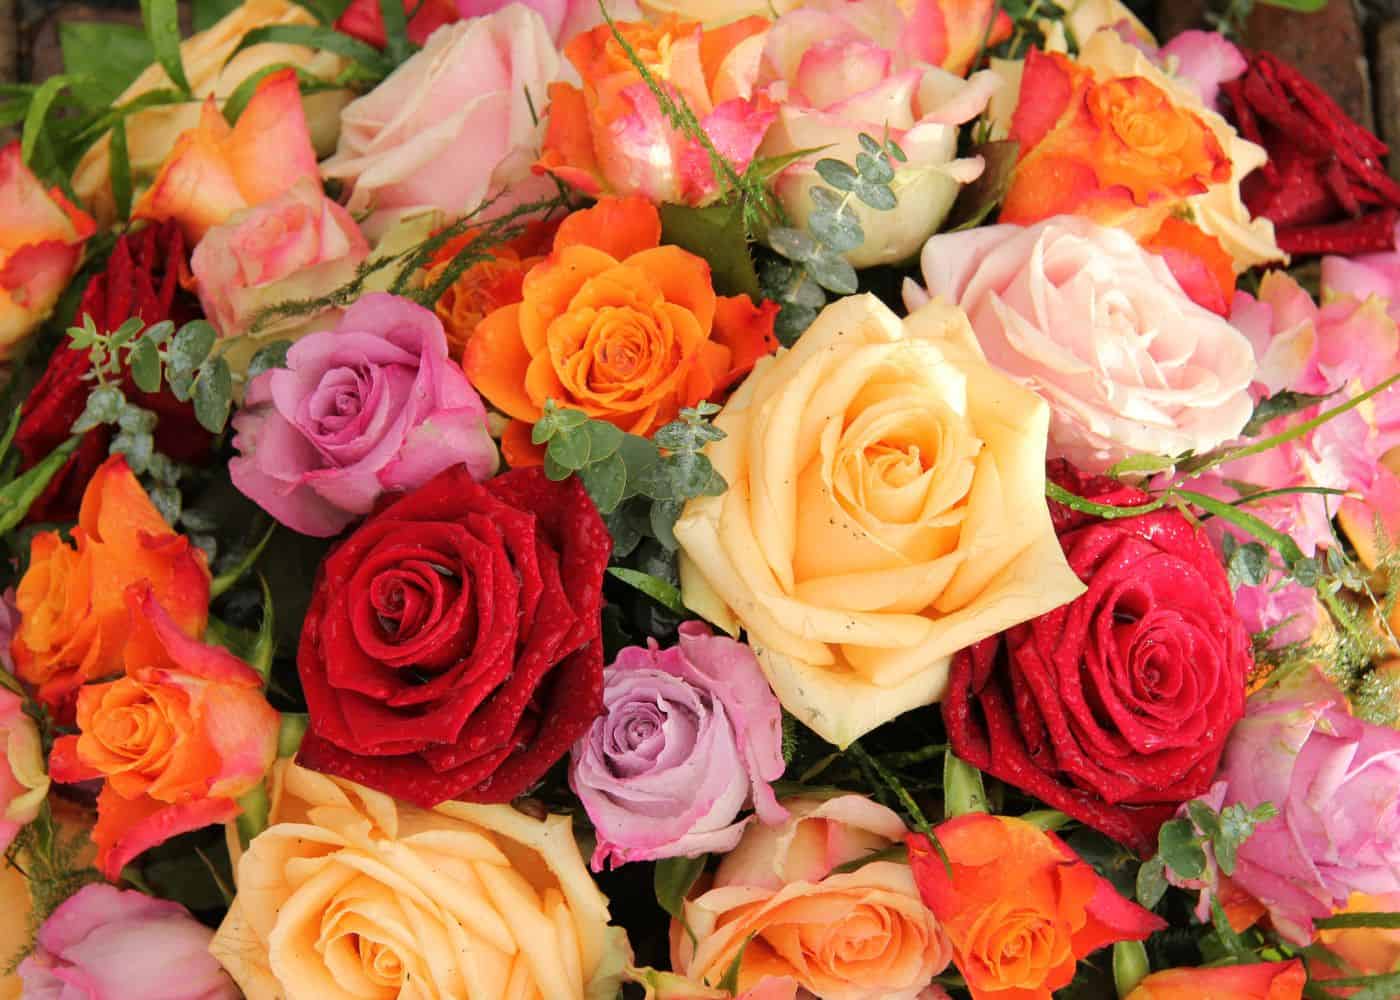 Rose color meaning guide - symbolism of different colors in bouquets